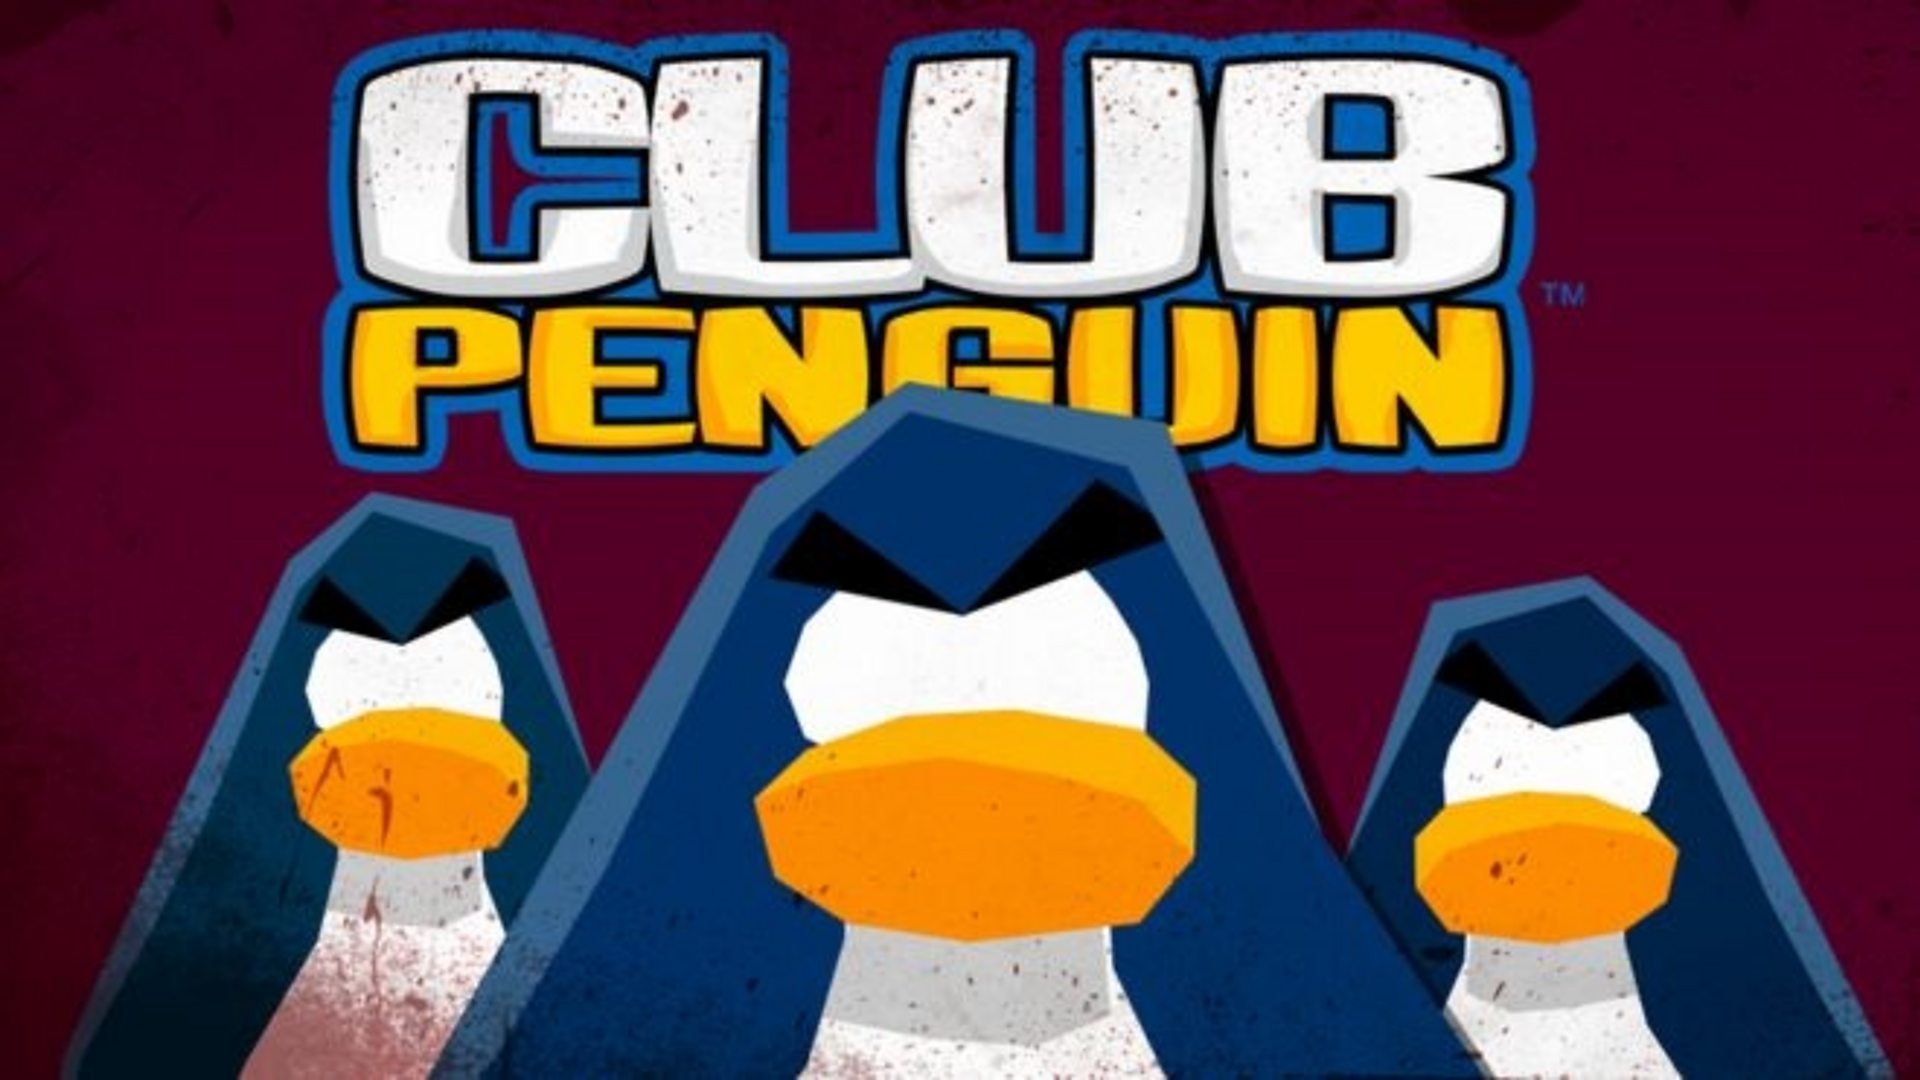 Club Penguin: How fans turned Disney's children's game toxic - BBC